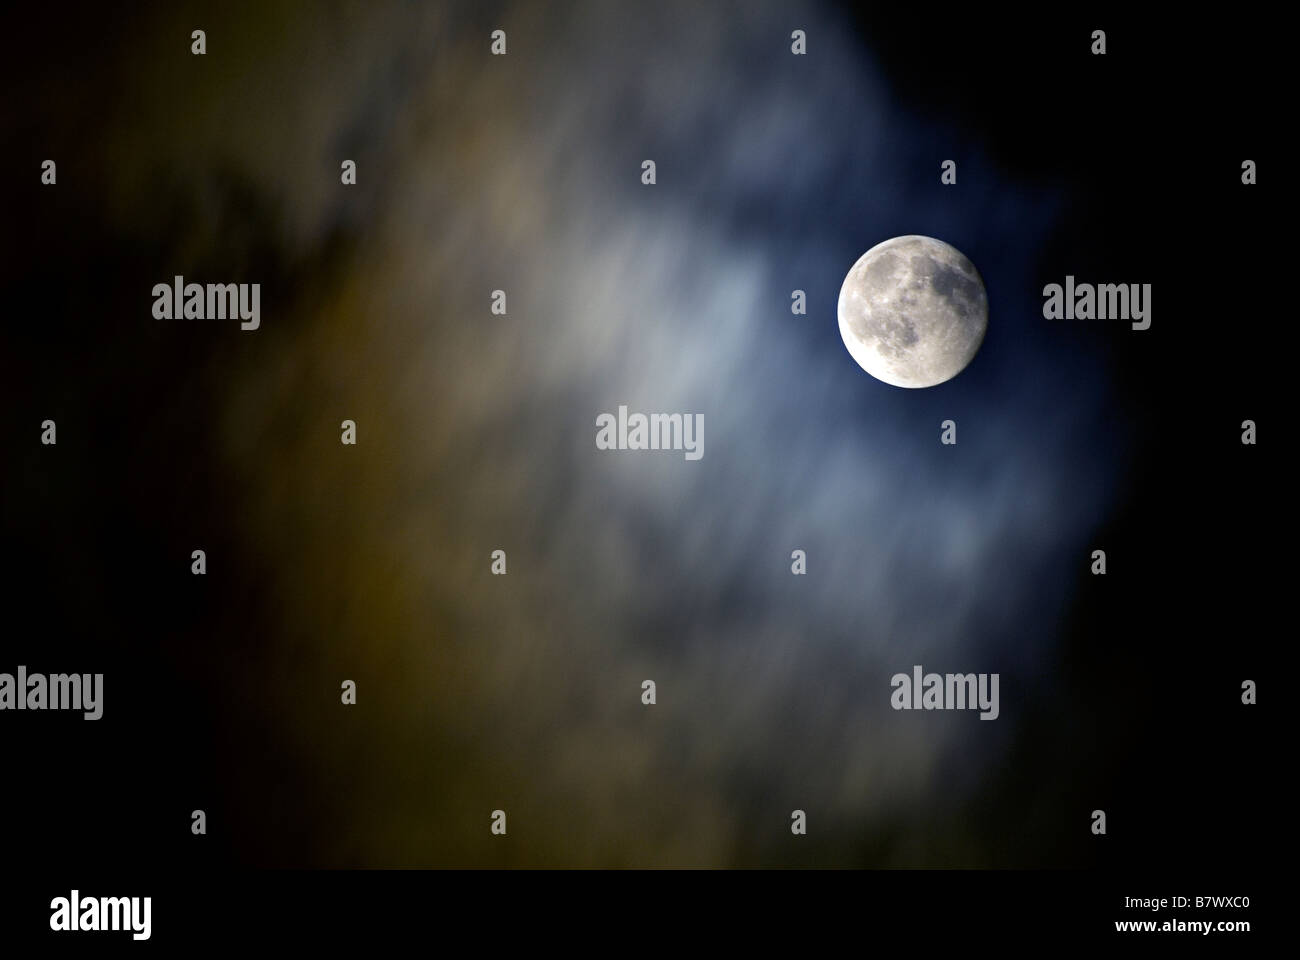 MOON SHOT  IN A CLOUDY NIGHT SKY Stock Photo